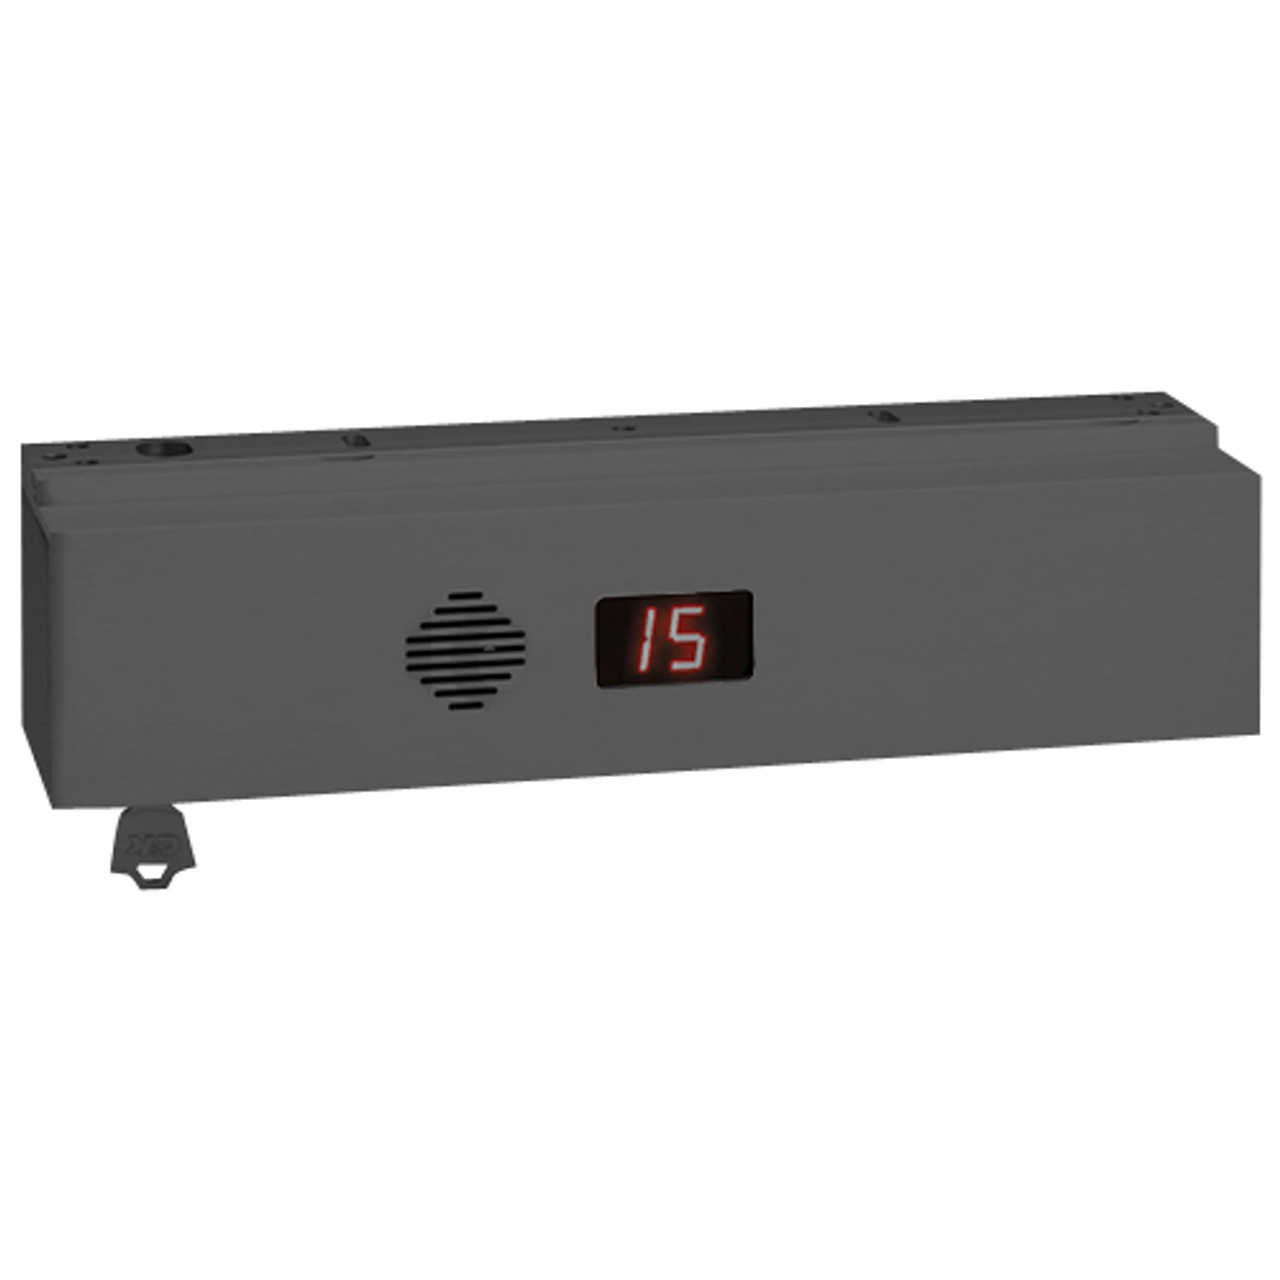 1511S-NC-K-Y-B SDC 1511S Series Single Integrated Delayed Egress Locks with Magnetic Bond Alert Sensor in Black Anodized